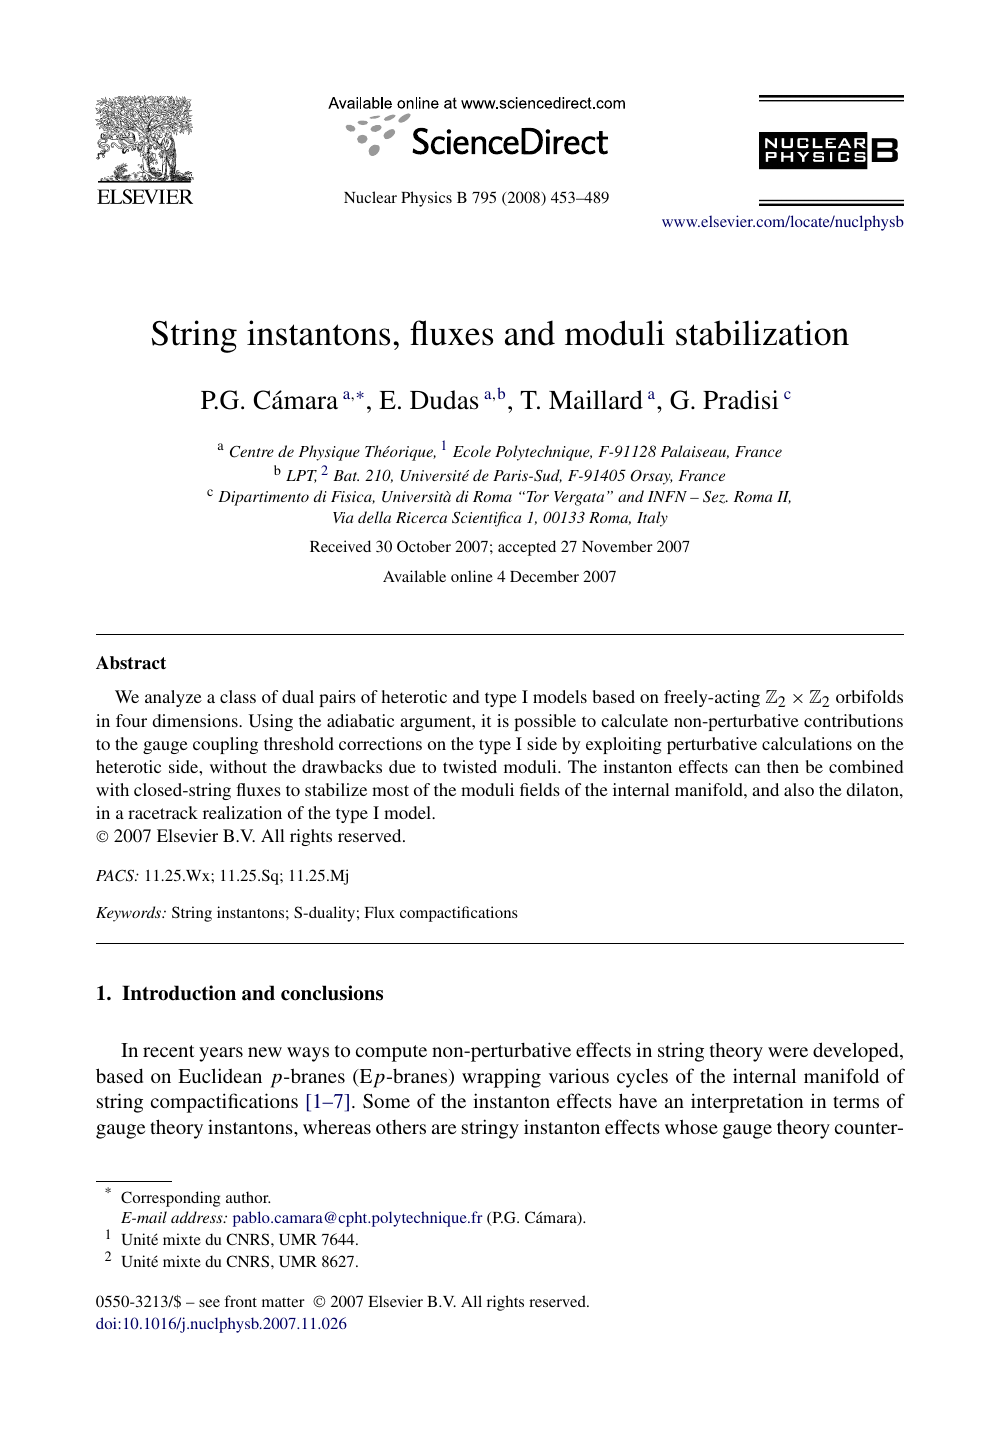 String Instantons Fluxes And Moduli Stabilization Topic Of Research Paper In Physical Sciences Download Scholarly Article Pdf And Read For Free On Cyberleninka Open Science Hub